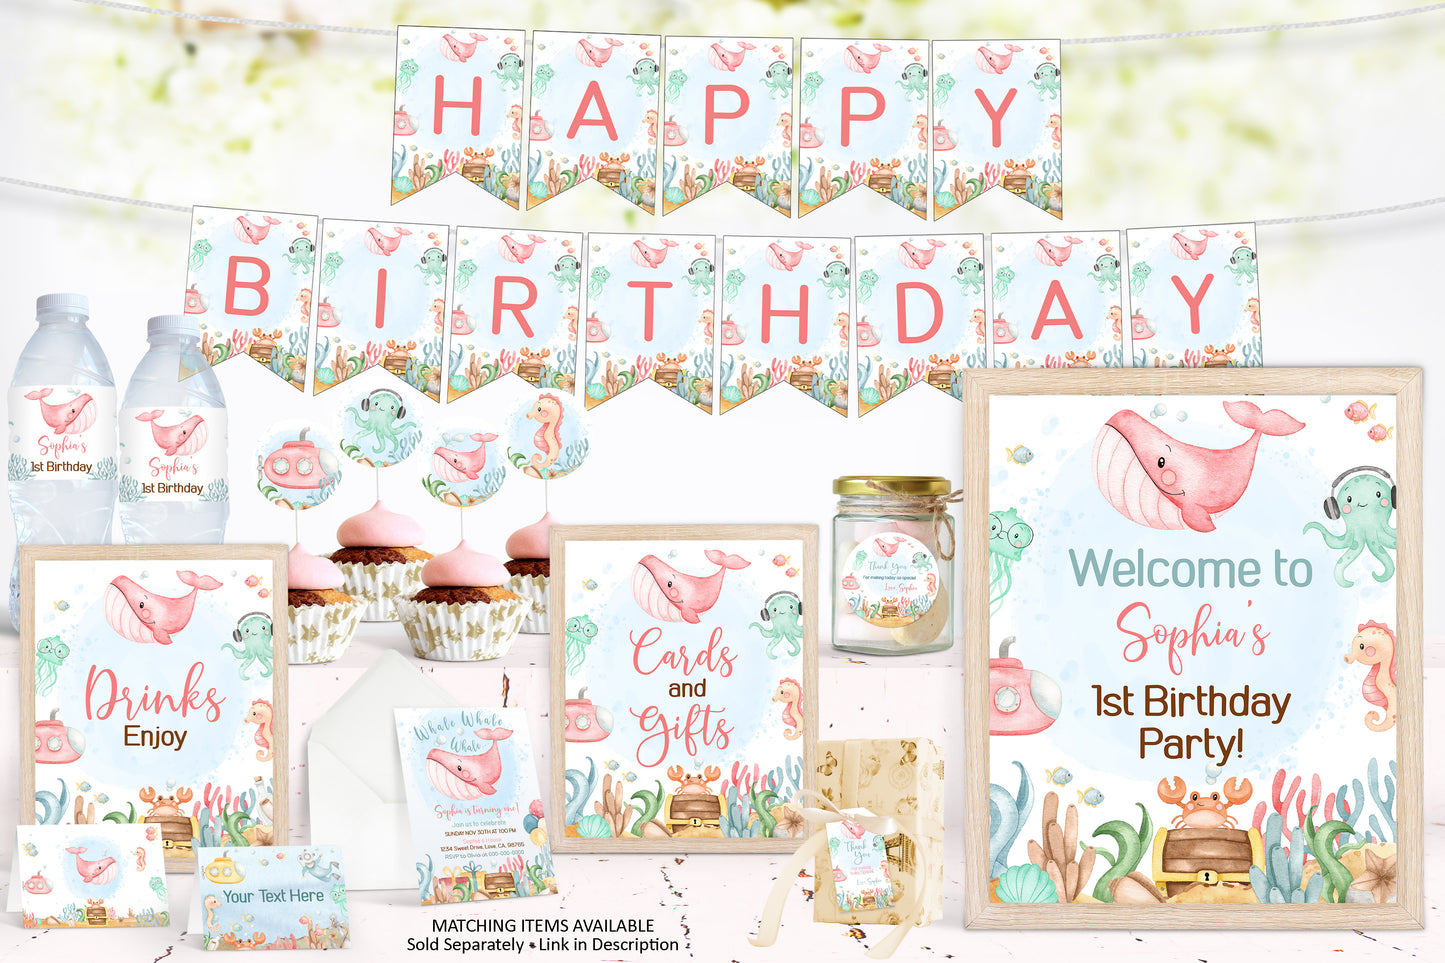 Girl Under the Sea Cards and Gifts Sign | Ocean Themed Party Table Decorations - 44A